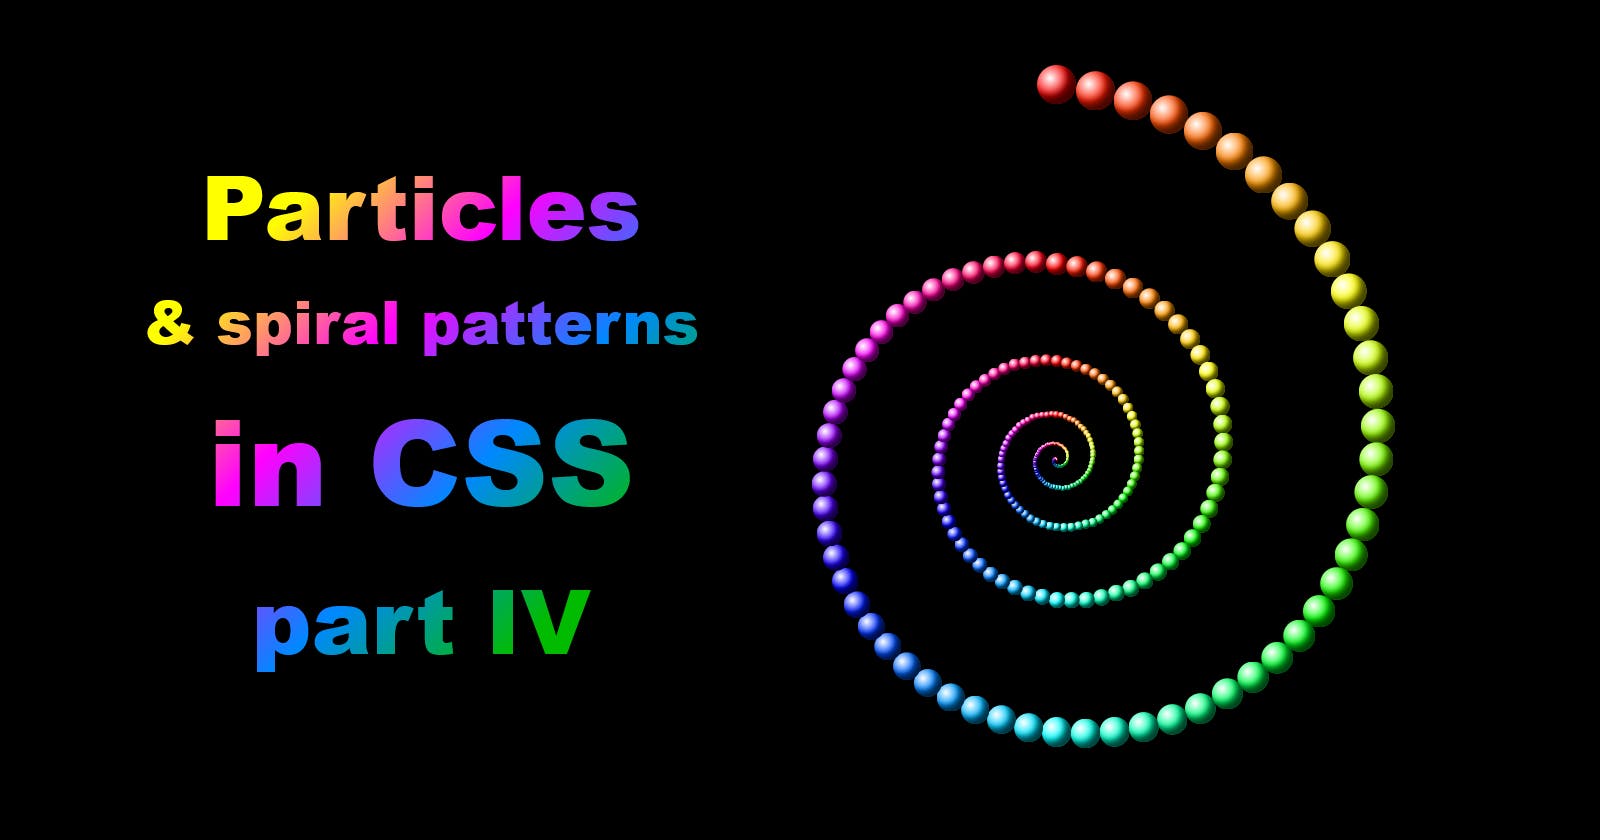 Particles & spiral patterns in CSS: part IV